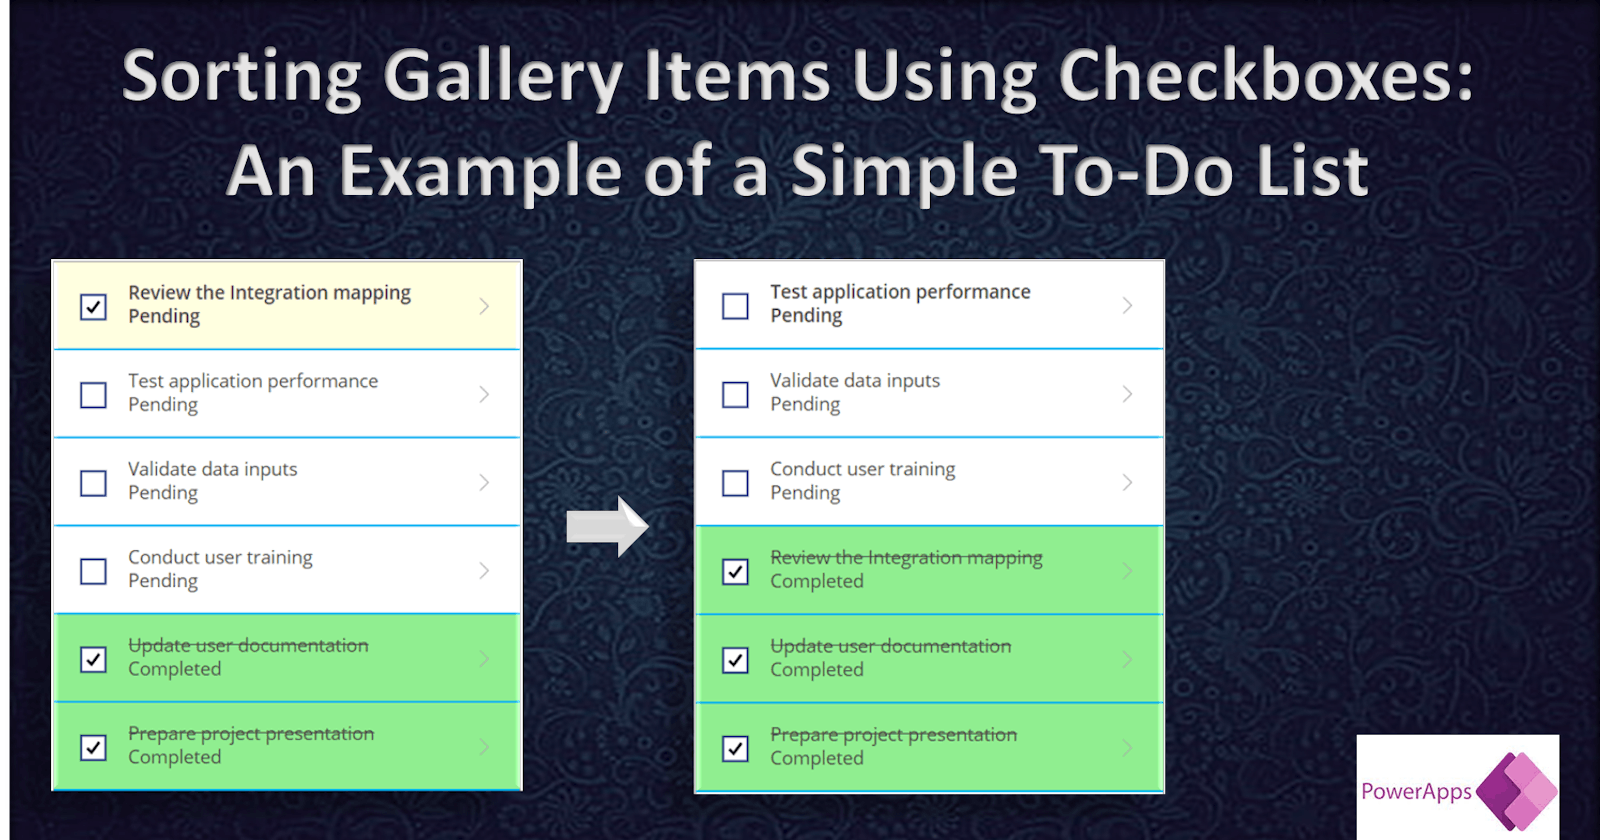 Sorting Gallery Items Using Checkboxes: An Example of a Simple To-Do List